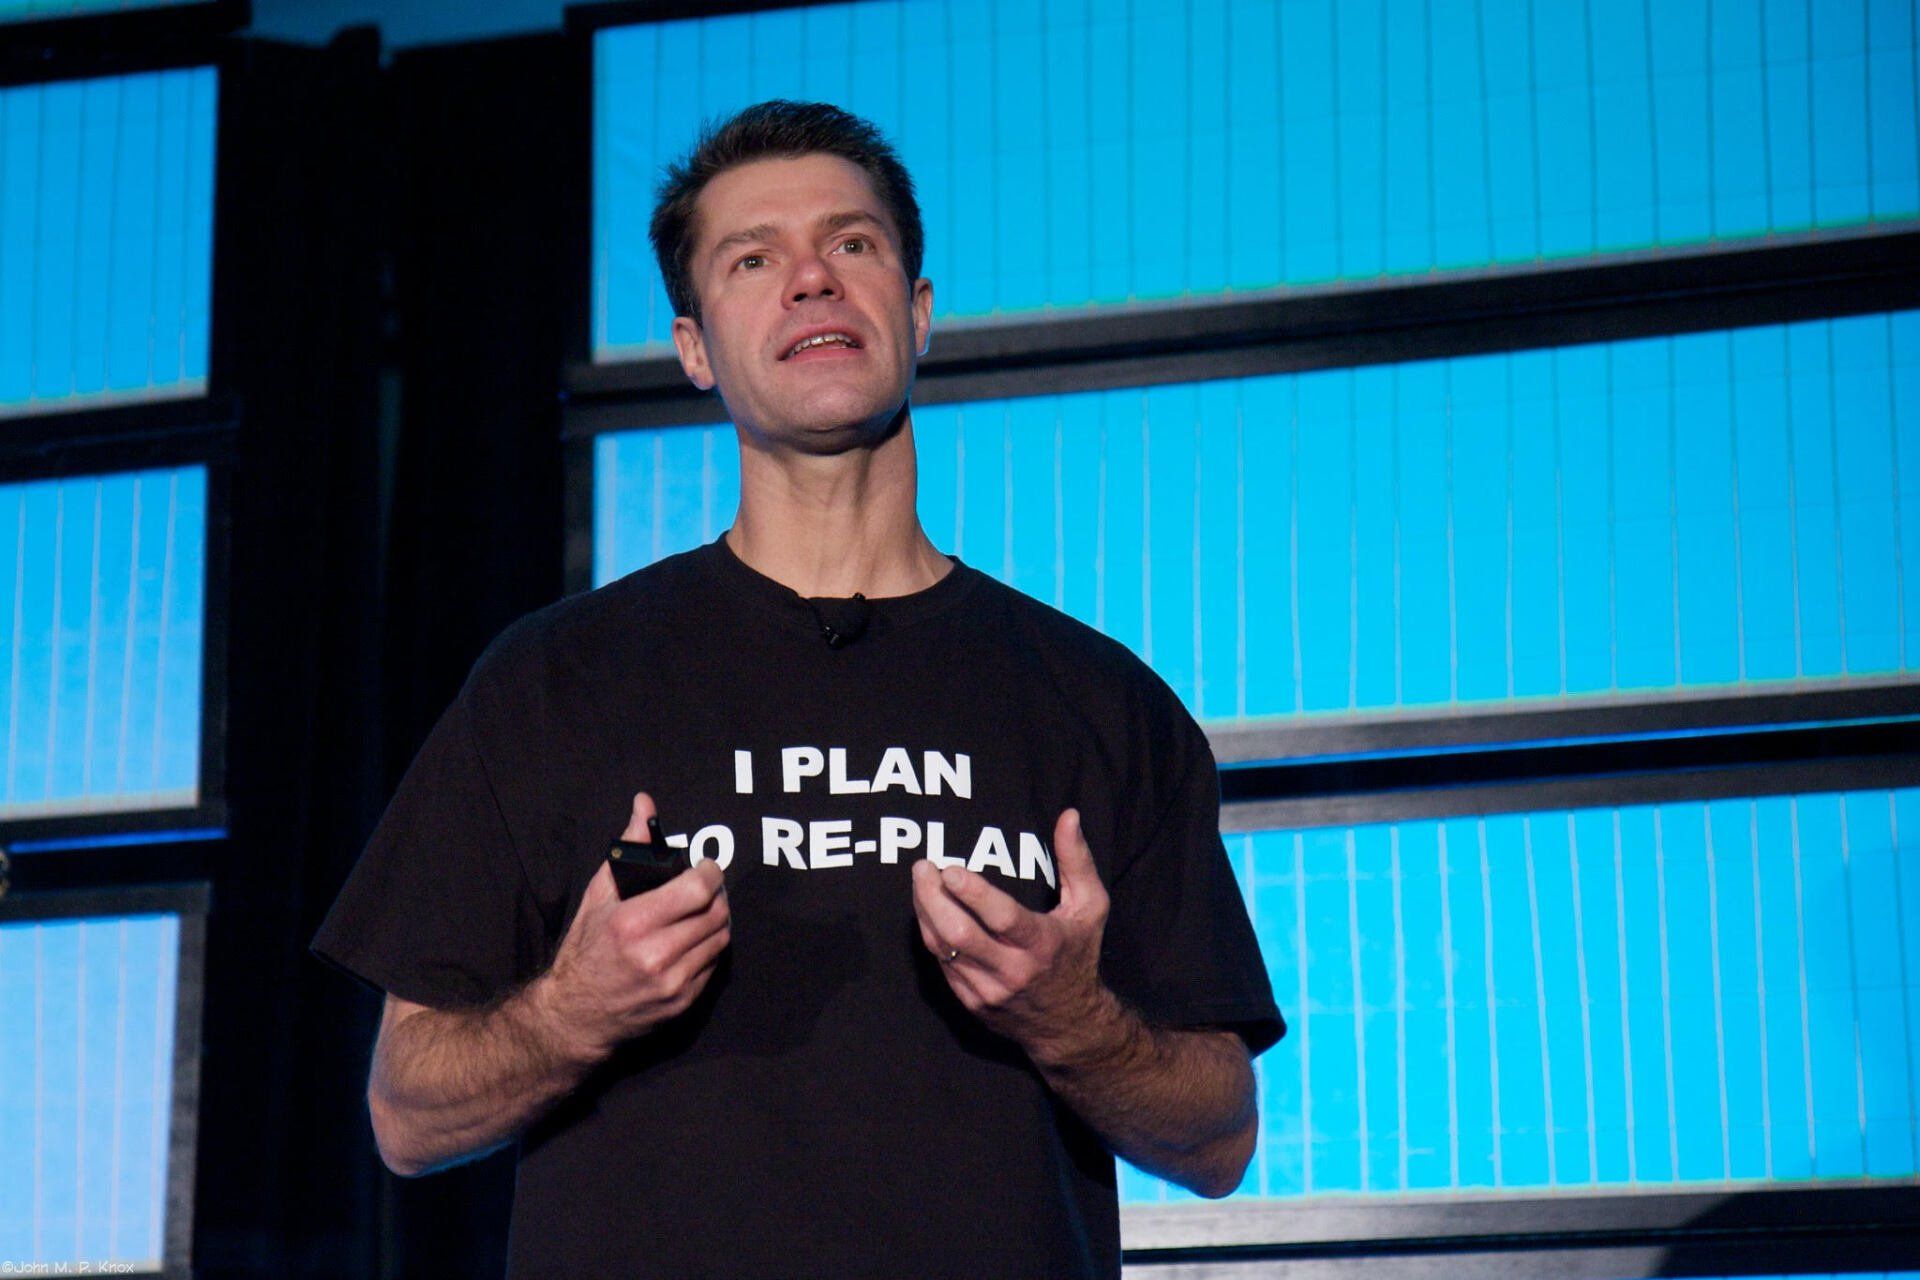 A shot of Luke Hohmann, a white man with short dark hair, giving a talk on stage. He is wearing a black t-shirt that reads 